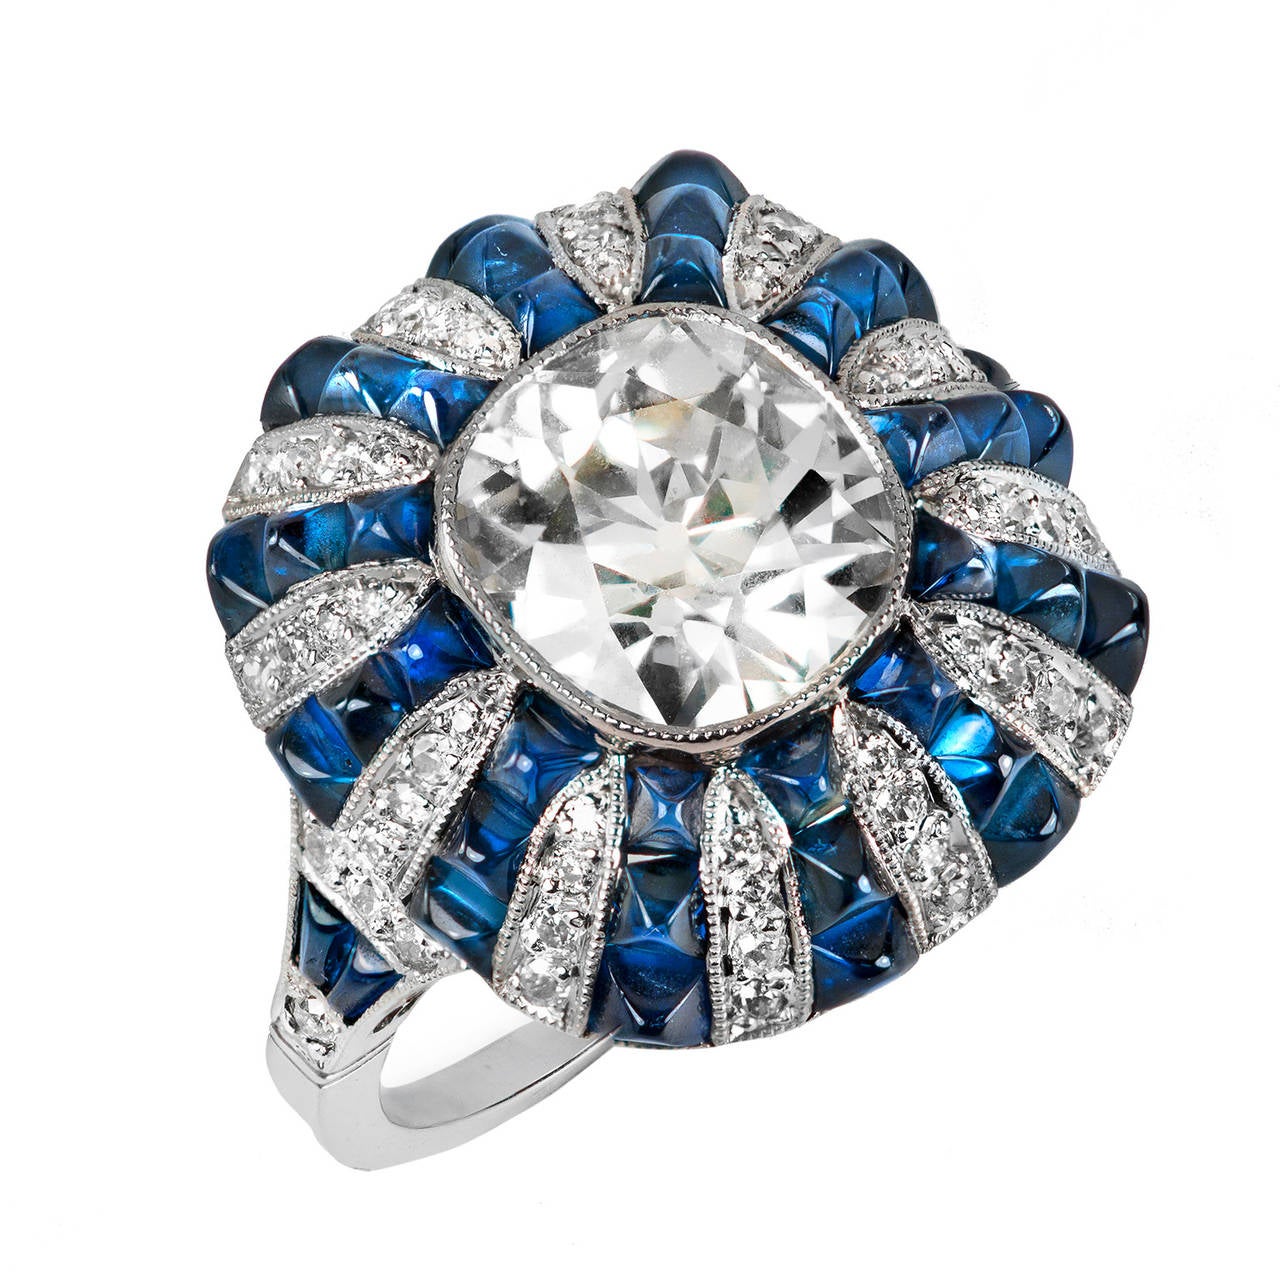  GIA CERT 2.63 Carat Diamond and Sugarloaf Cut Sapphire Platinum Cocktail Ring

This certified cushion cut diamond and plump Sugarloaf cut sapphire Art Deco inspired ring exudes an aura of inspiration from the Art Deco era. At 2.63 carats, its S-T